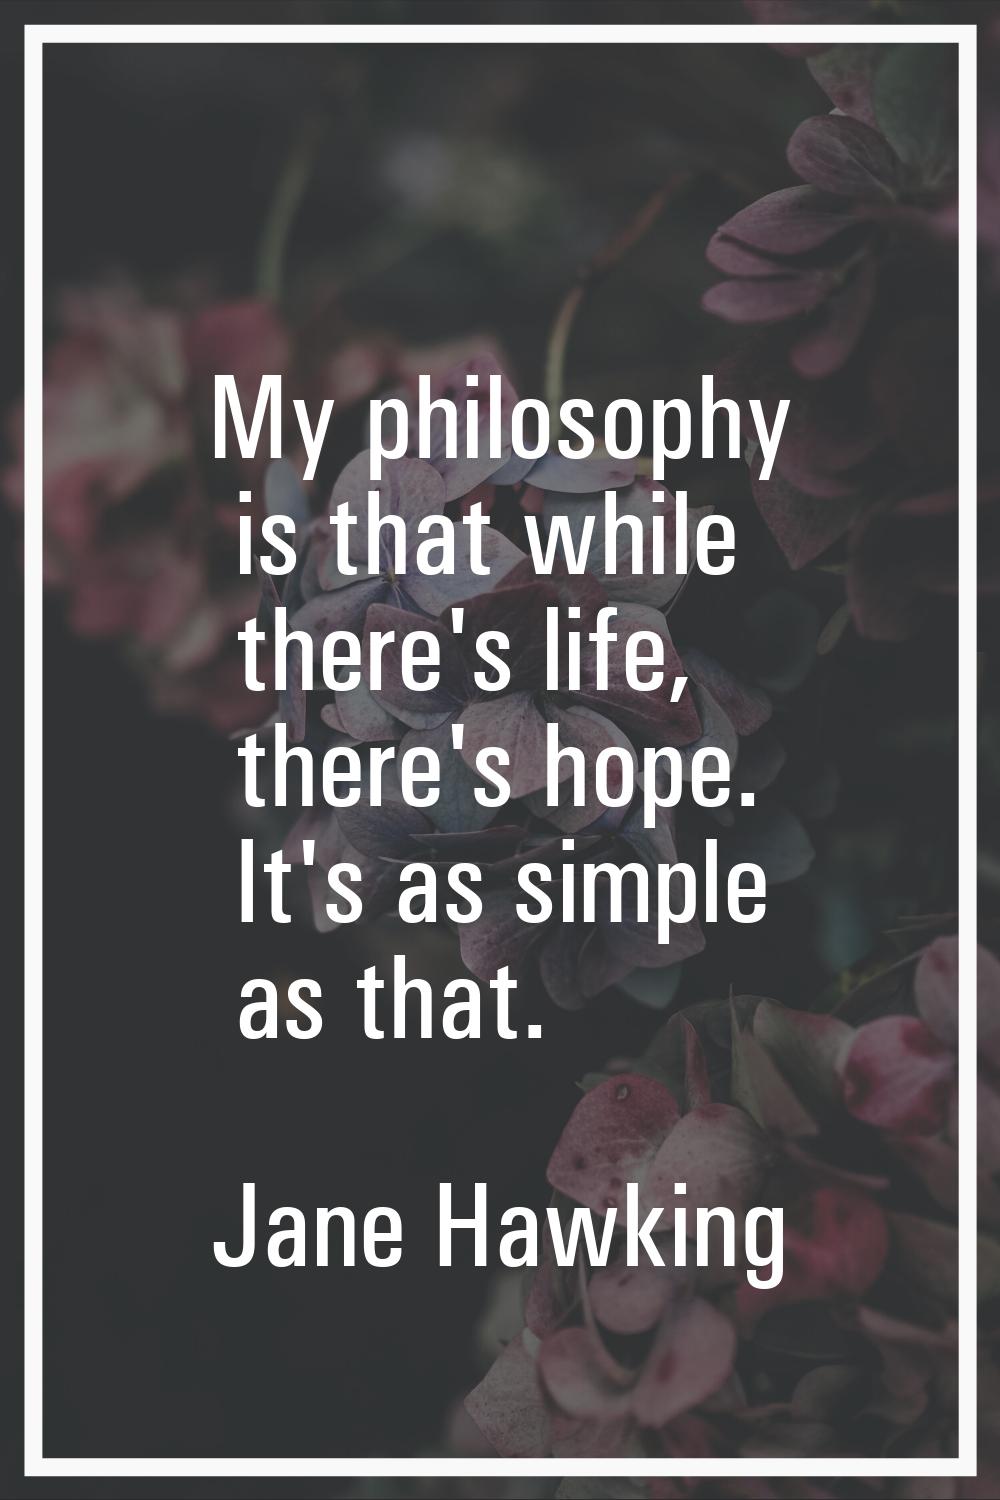 My philosophy is that while there's life, there's hope. It's as simple as that.